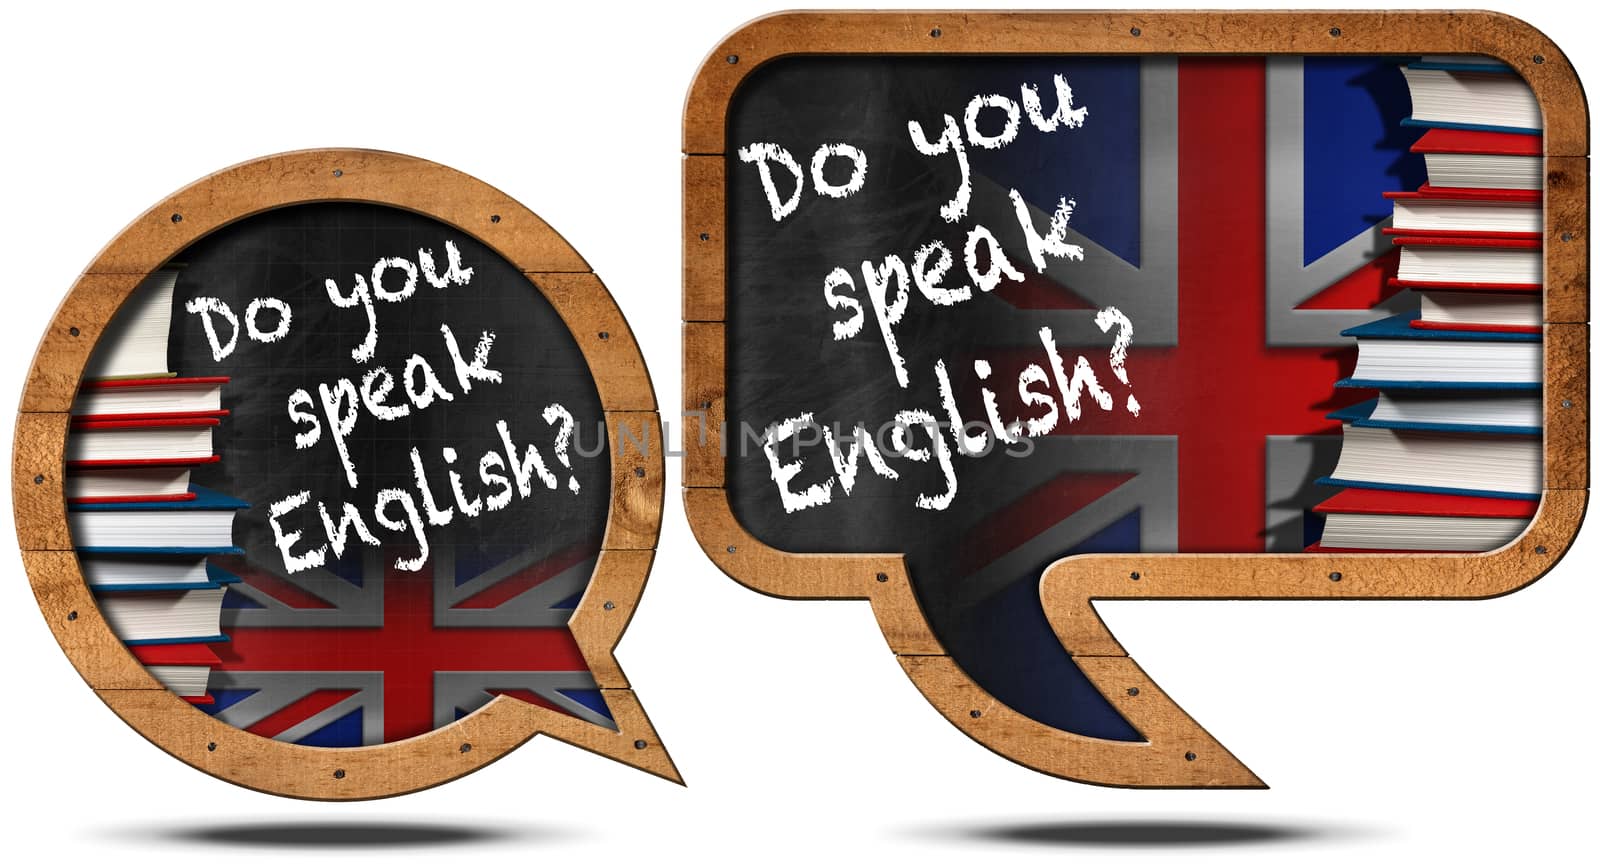 Two chalkboards with wooden frame in the shape of speech bubble with text Do you speak English? Books and uk flag